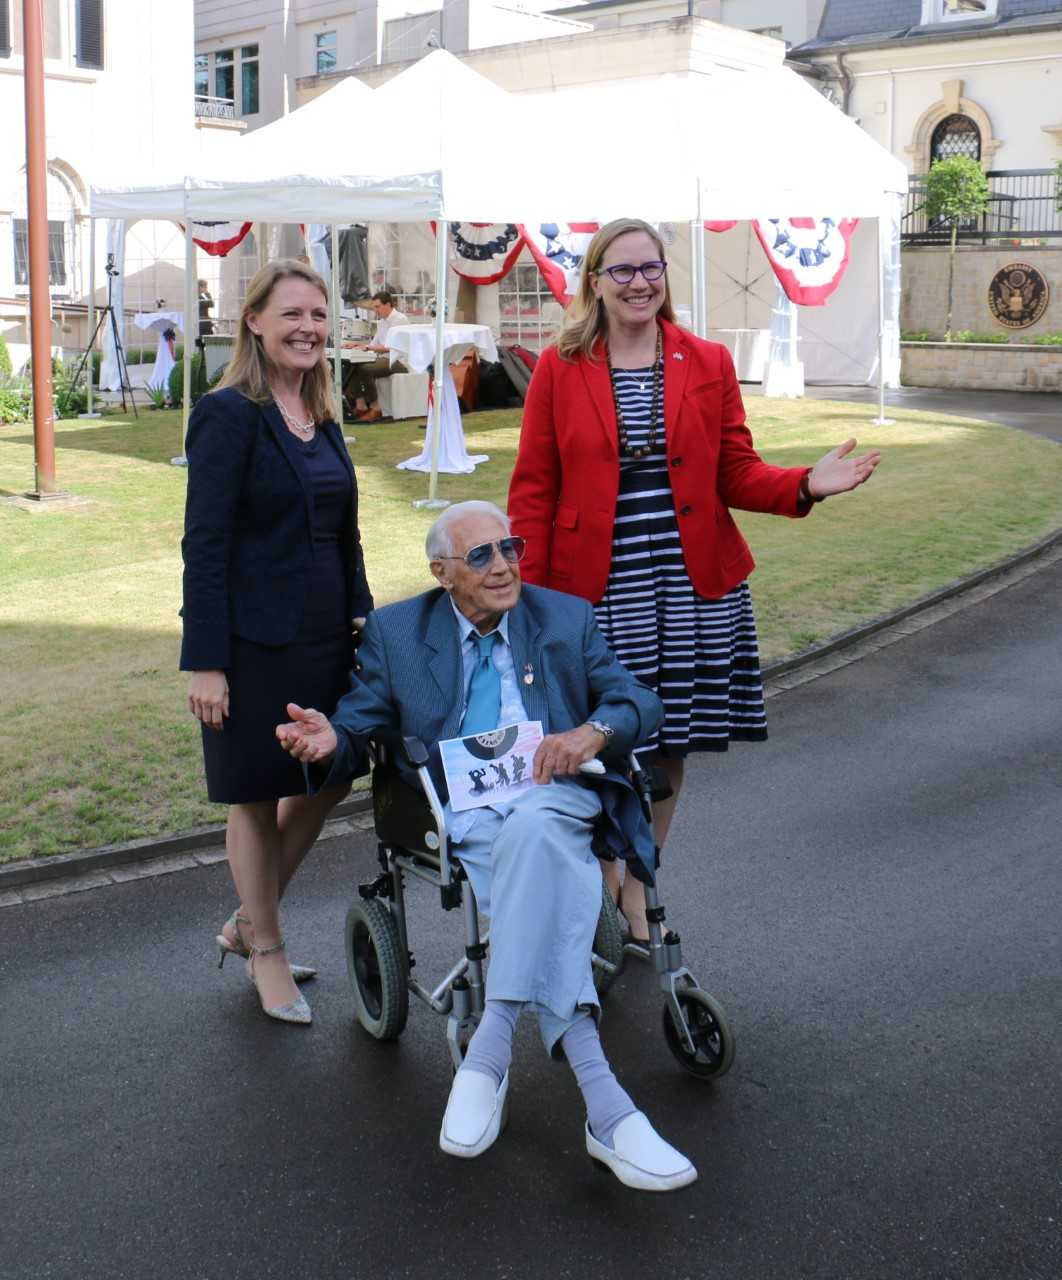 On Thursday 29 June, the new American chargé d’affaires Kerri Hannan (on right) celebrated the 4th of July during a party at the US embassy. In the middle, Michael Bondi, an American veteran of the Second World War who was in Luxembourg on liberation day. On the left, Kristi Roberts, deputy chief of mission and political & economic officer. US Embassy Luxembourg